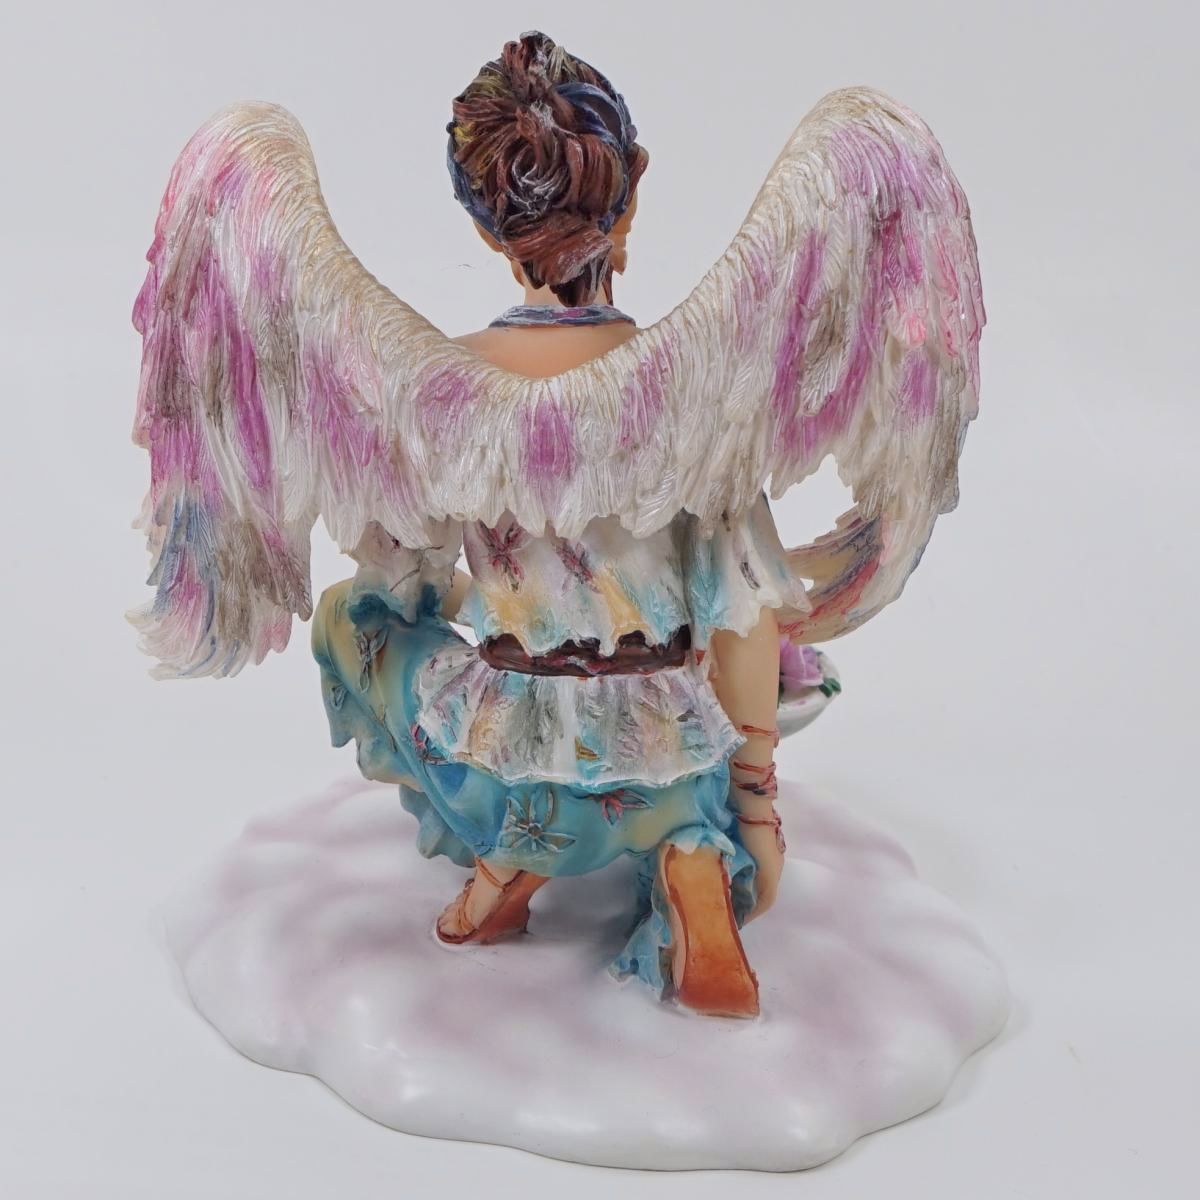 Crisalis Collection★ Angel of Faith and Hope (1-54) Standard